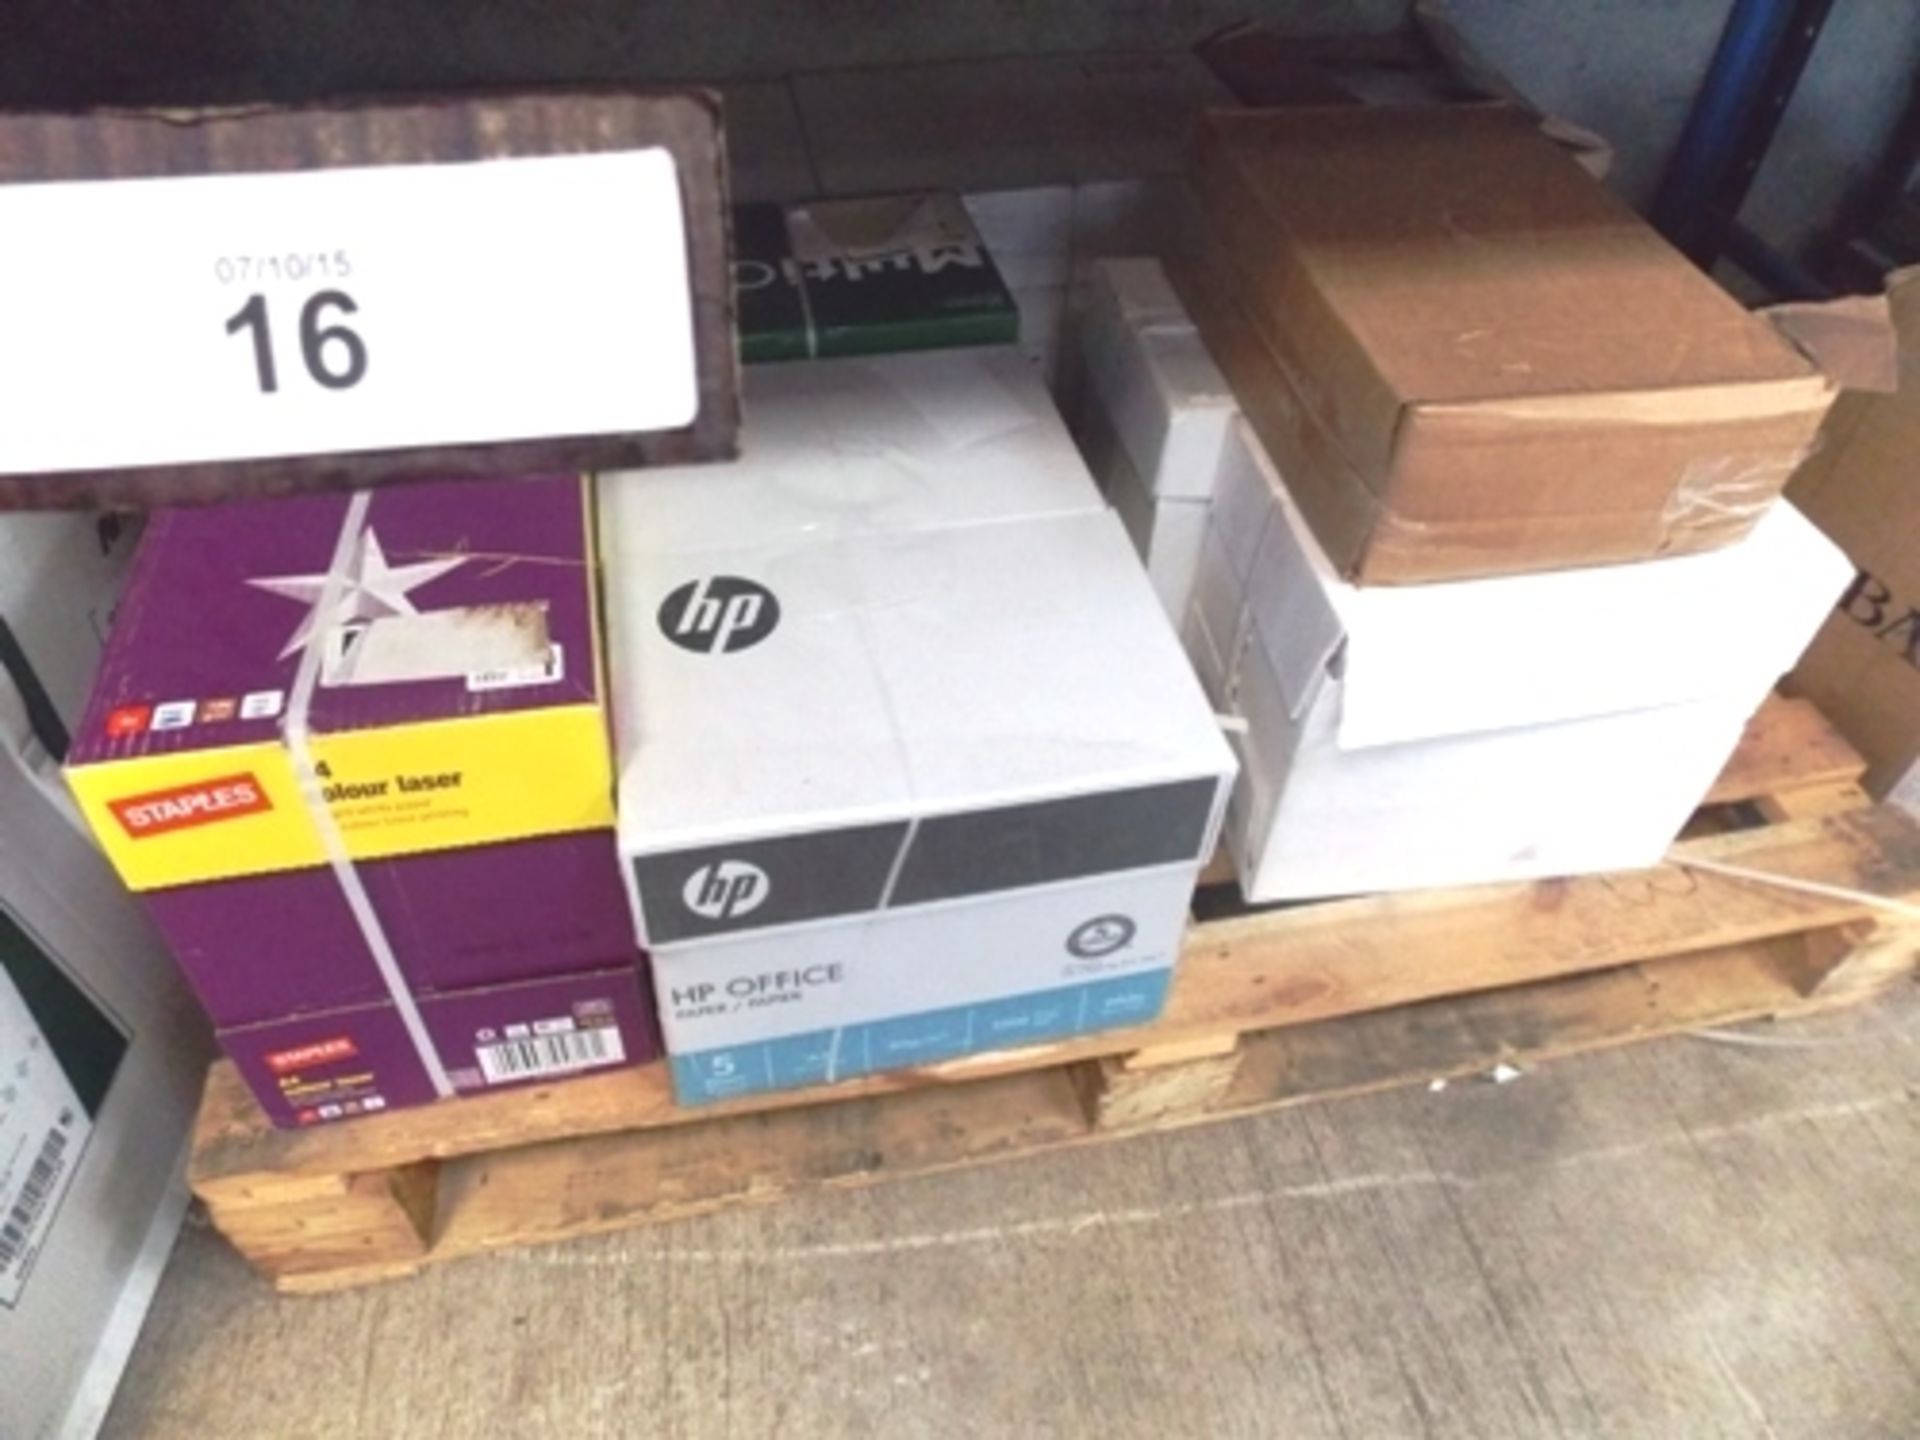 12 x boxes of A4 white copier/printer paper including brands HP & Staples etc. - New in box